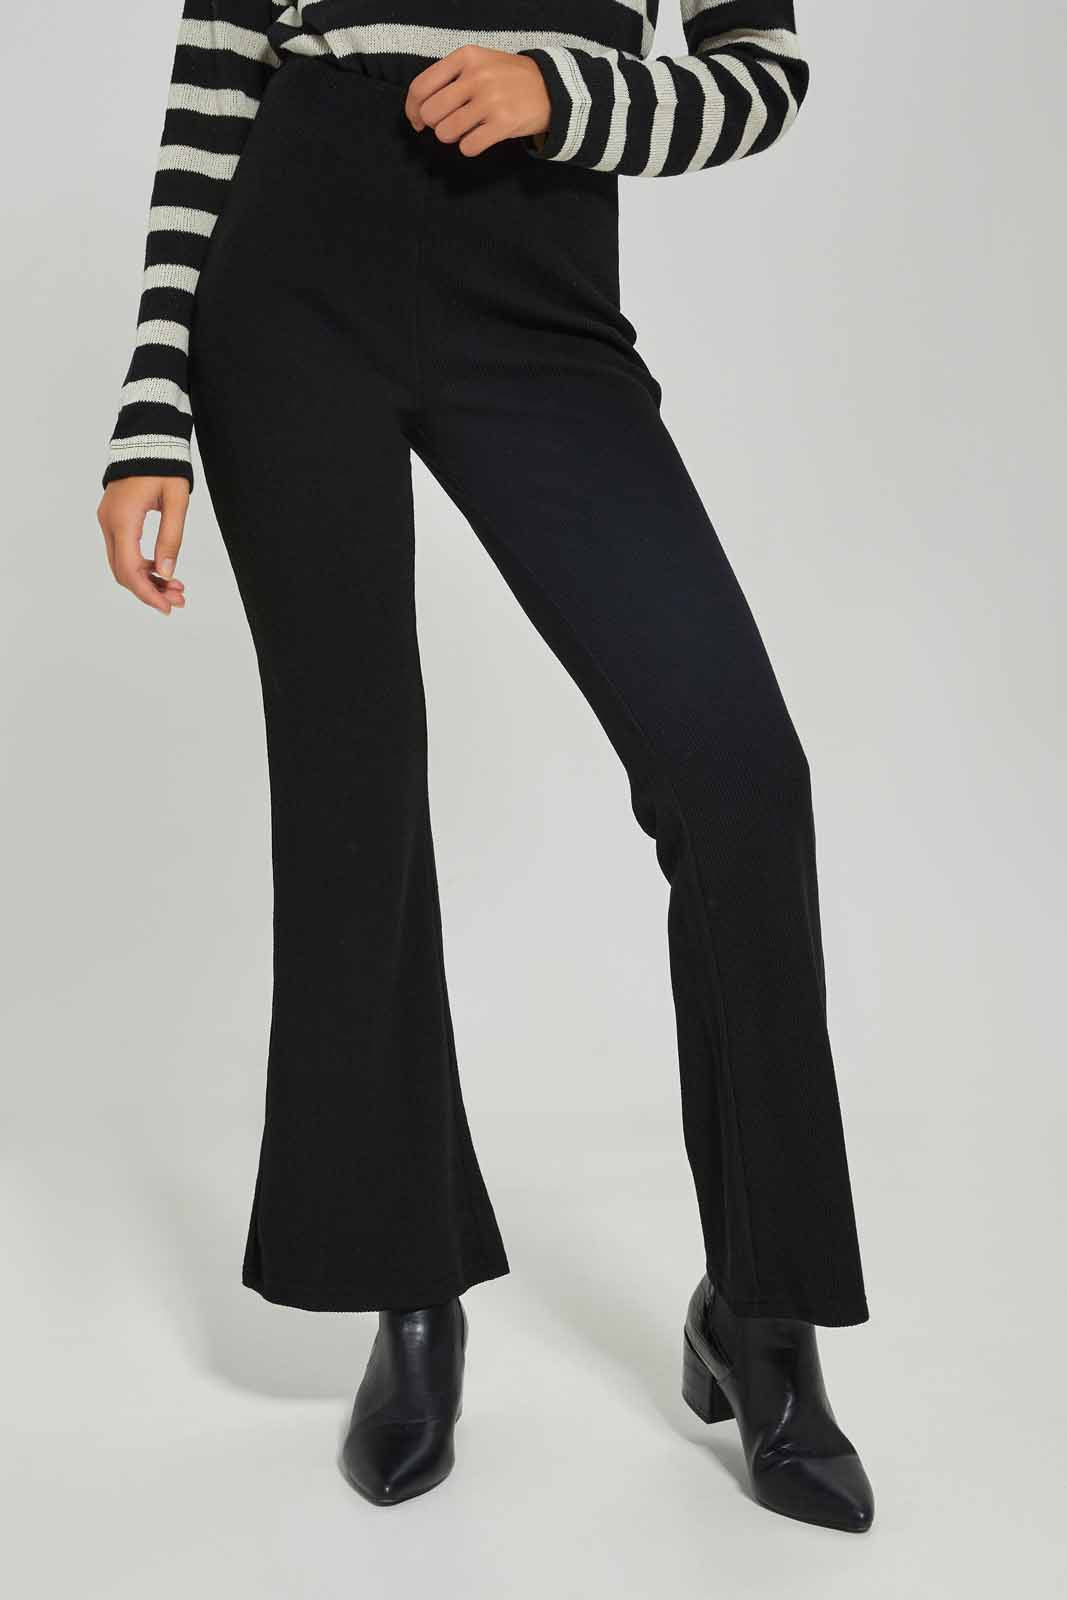 Buy Cream-coloured Trousers & Pants for Women by FREEHAND Online | Ajio.com